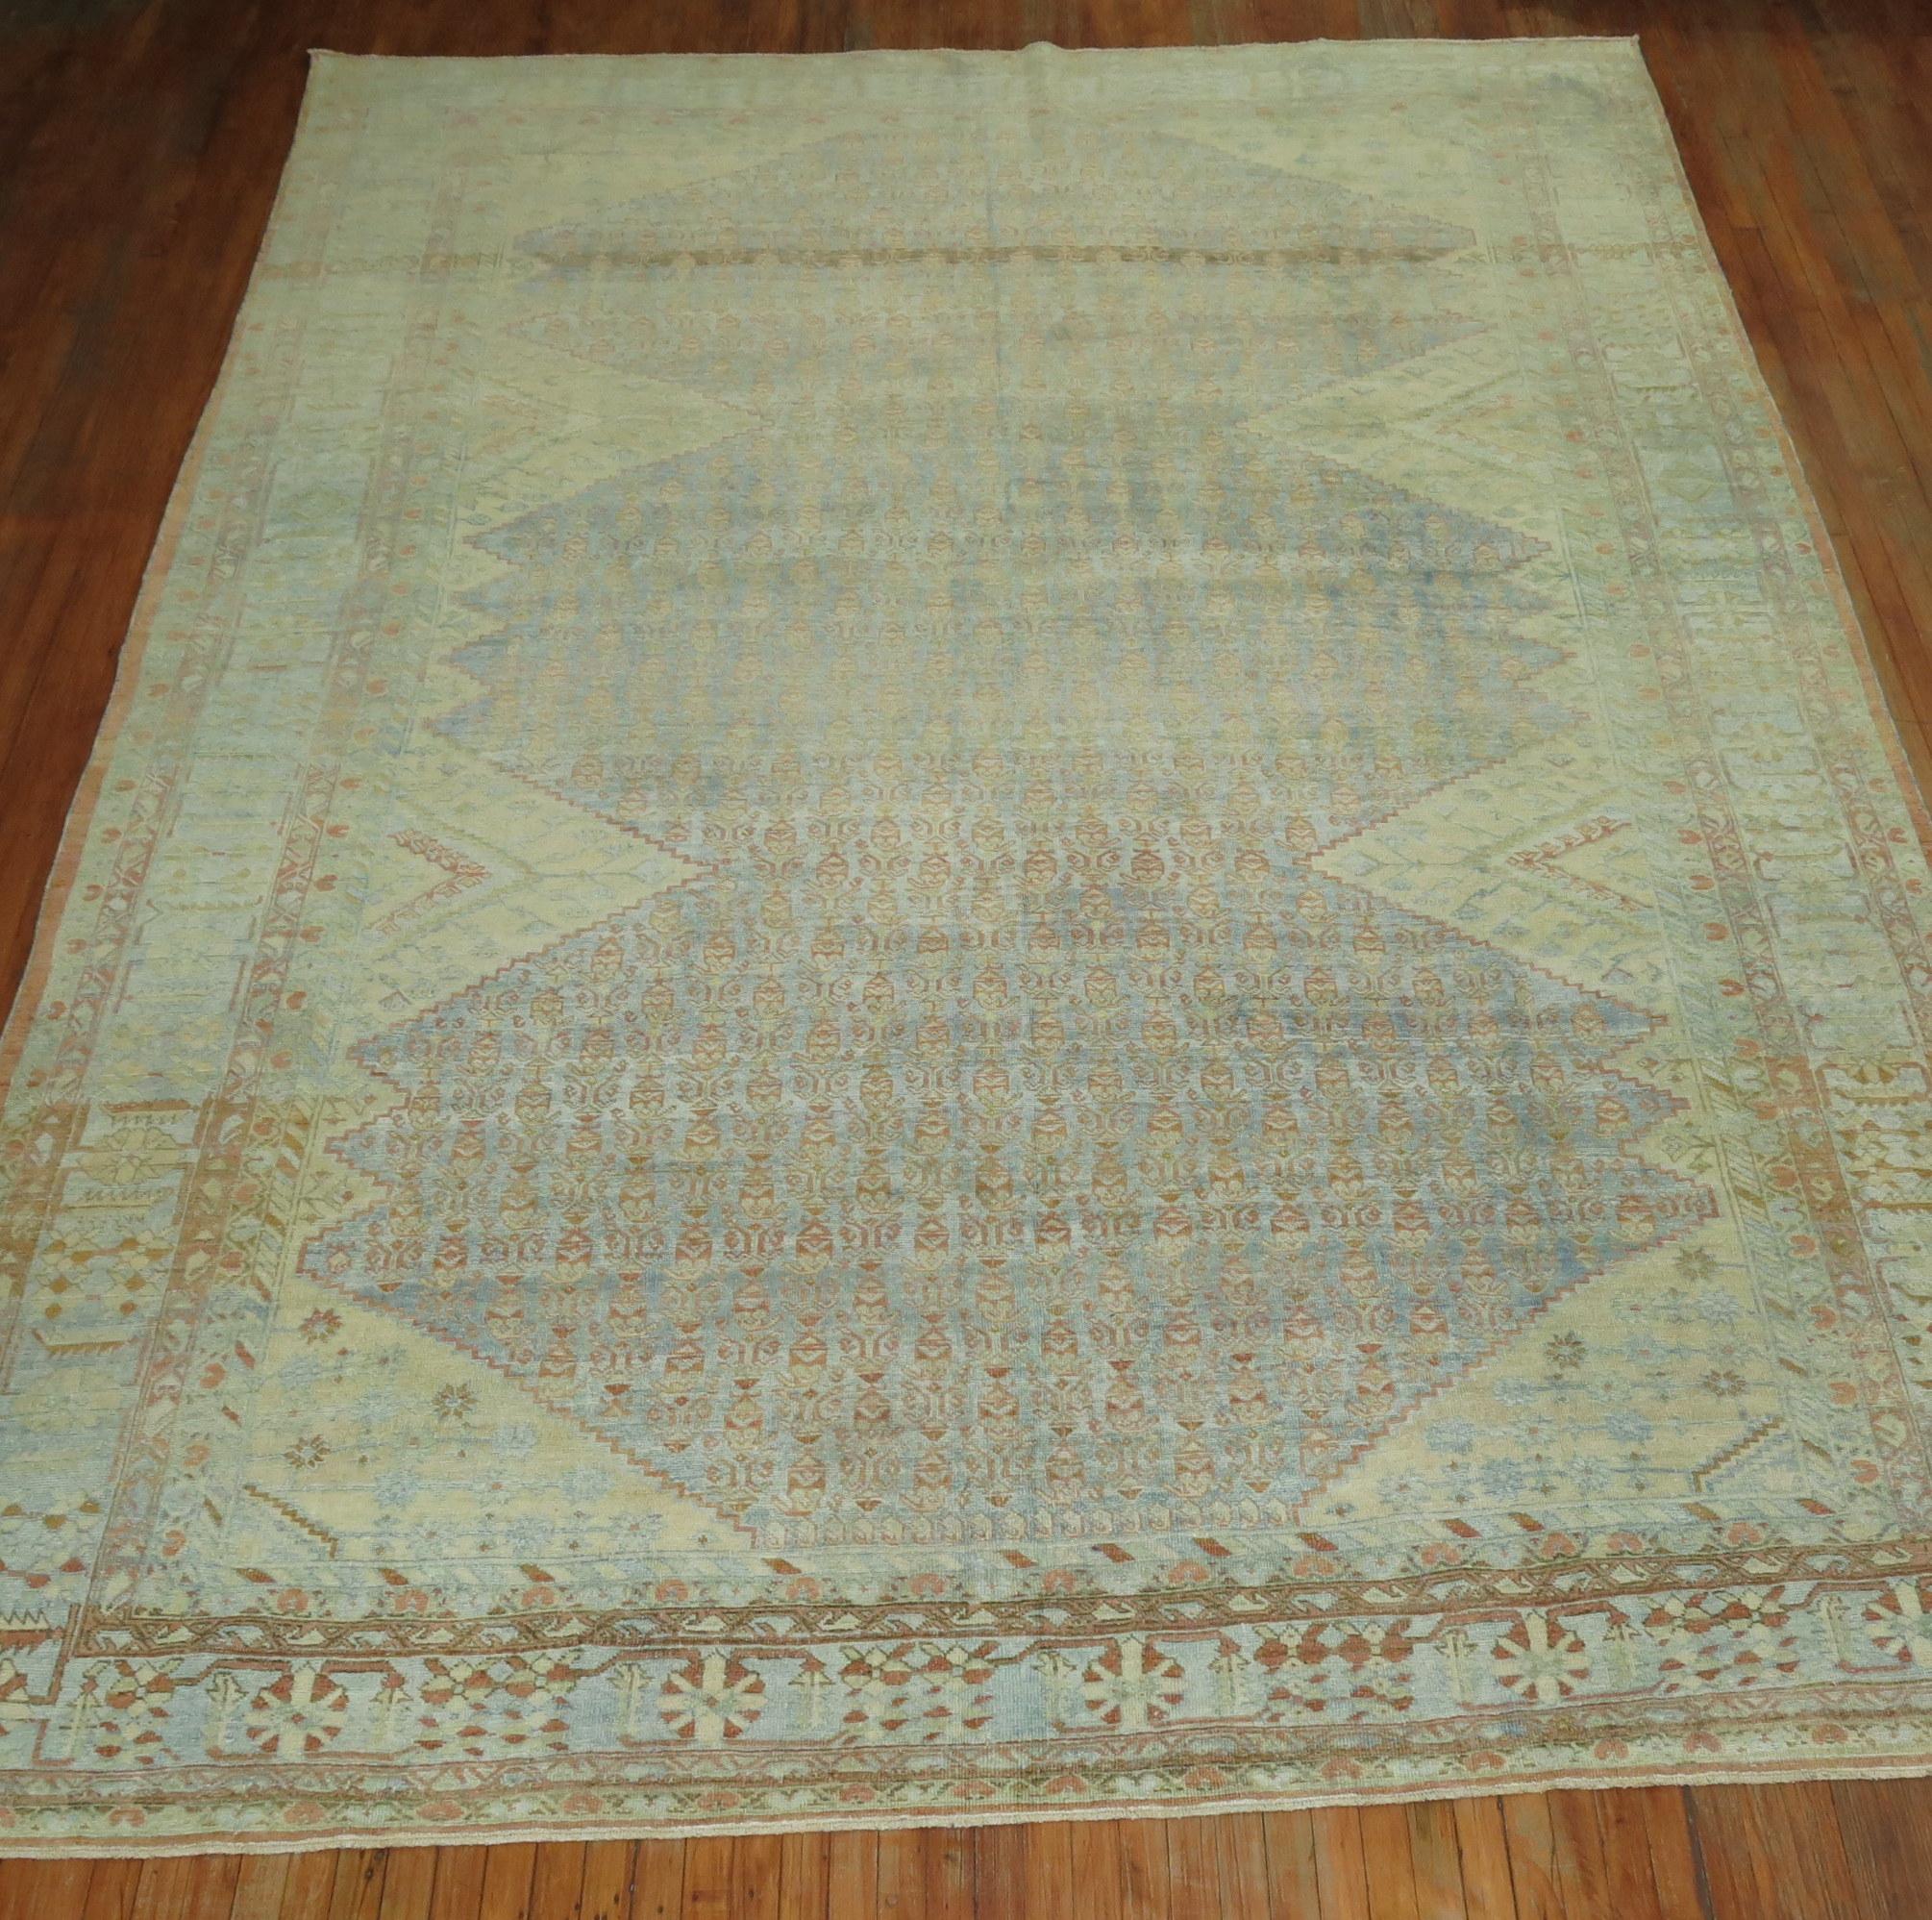 Room size Persian Mahal carpet with beige diagonal medallions and corner spandrels on a light blue all-over field accents in pale green and rust too, circa 1920.

Measures: 10'1” x 13'5”.